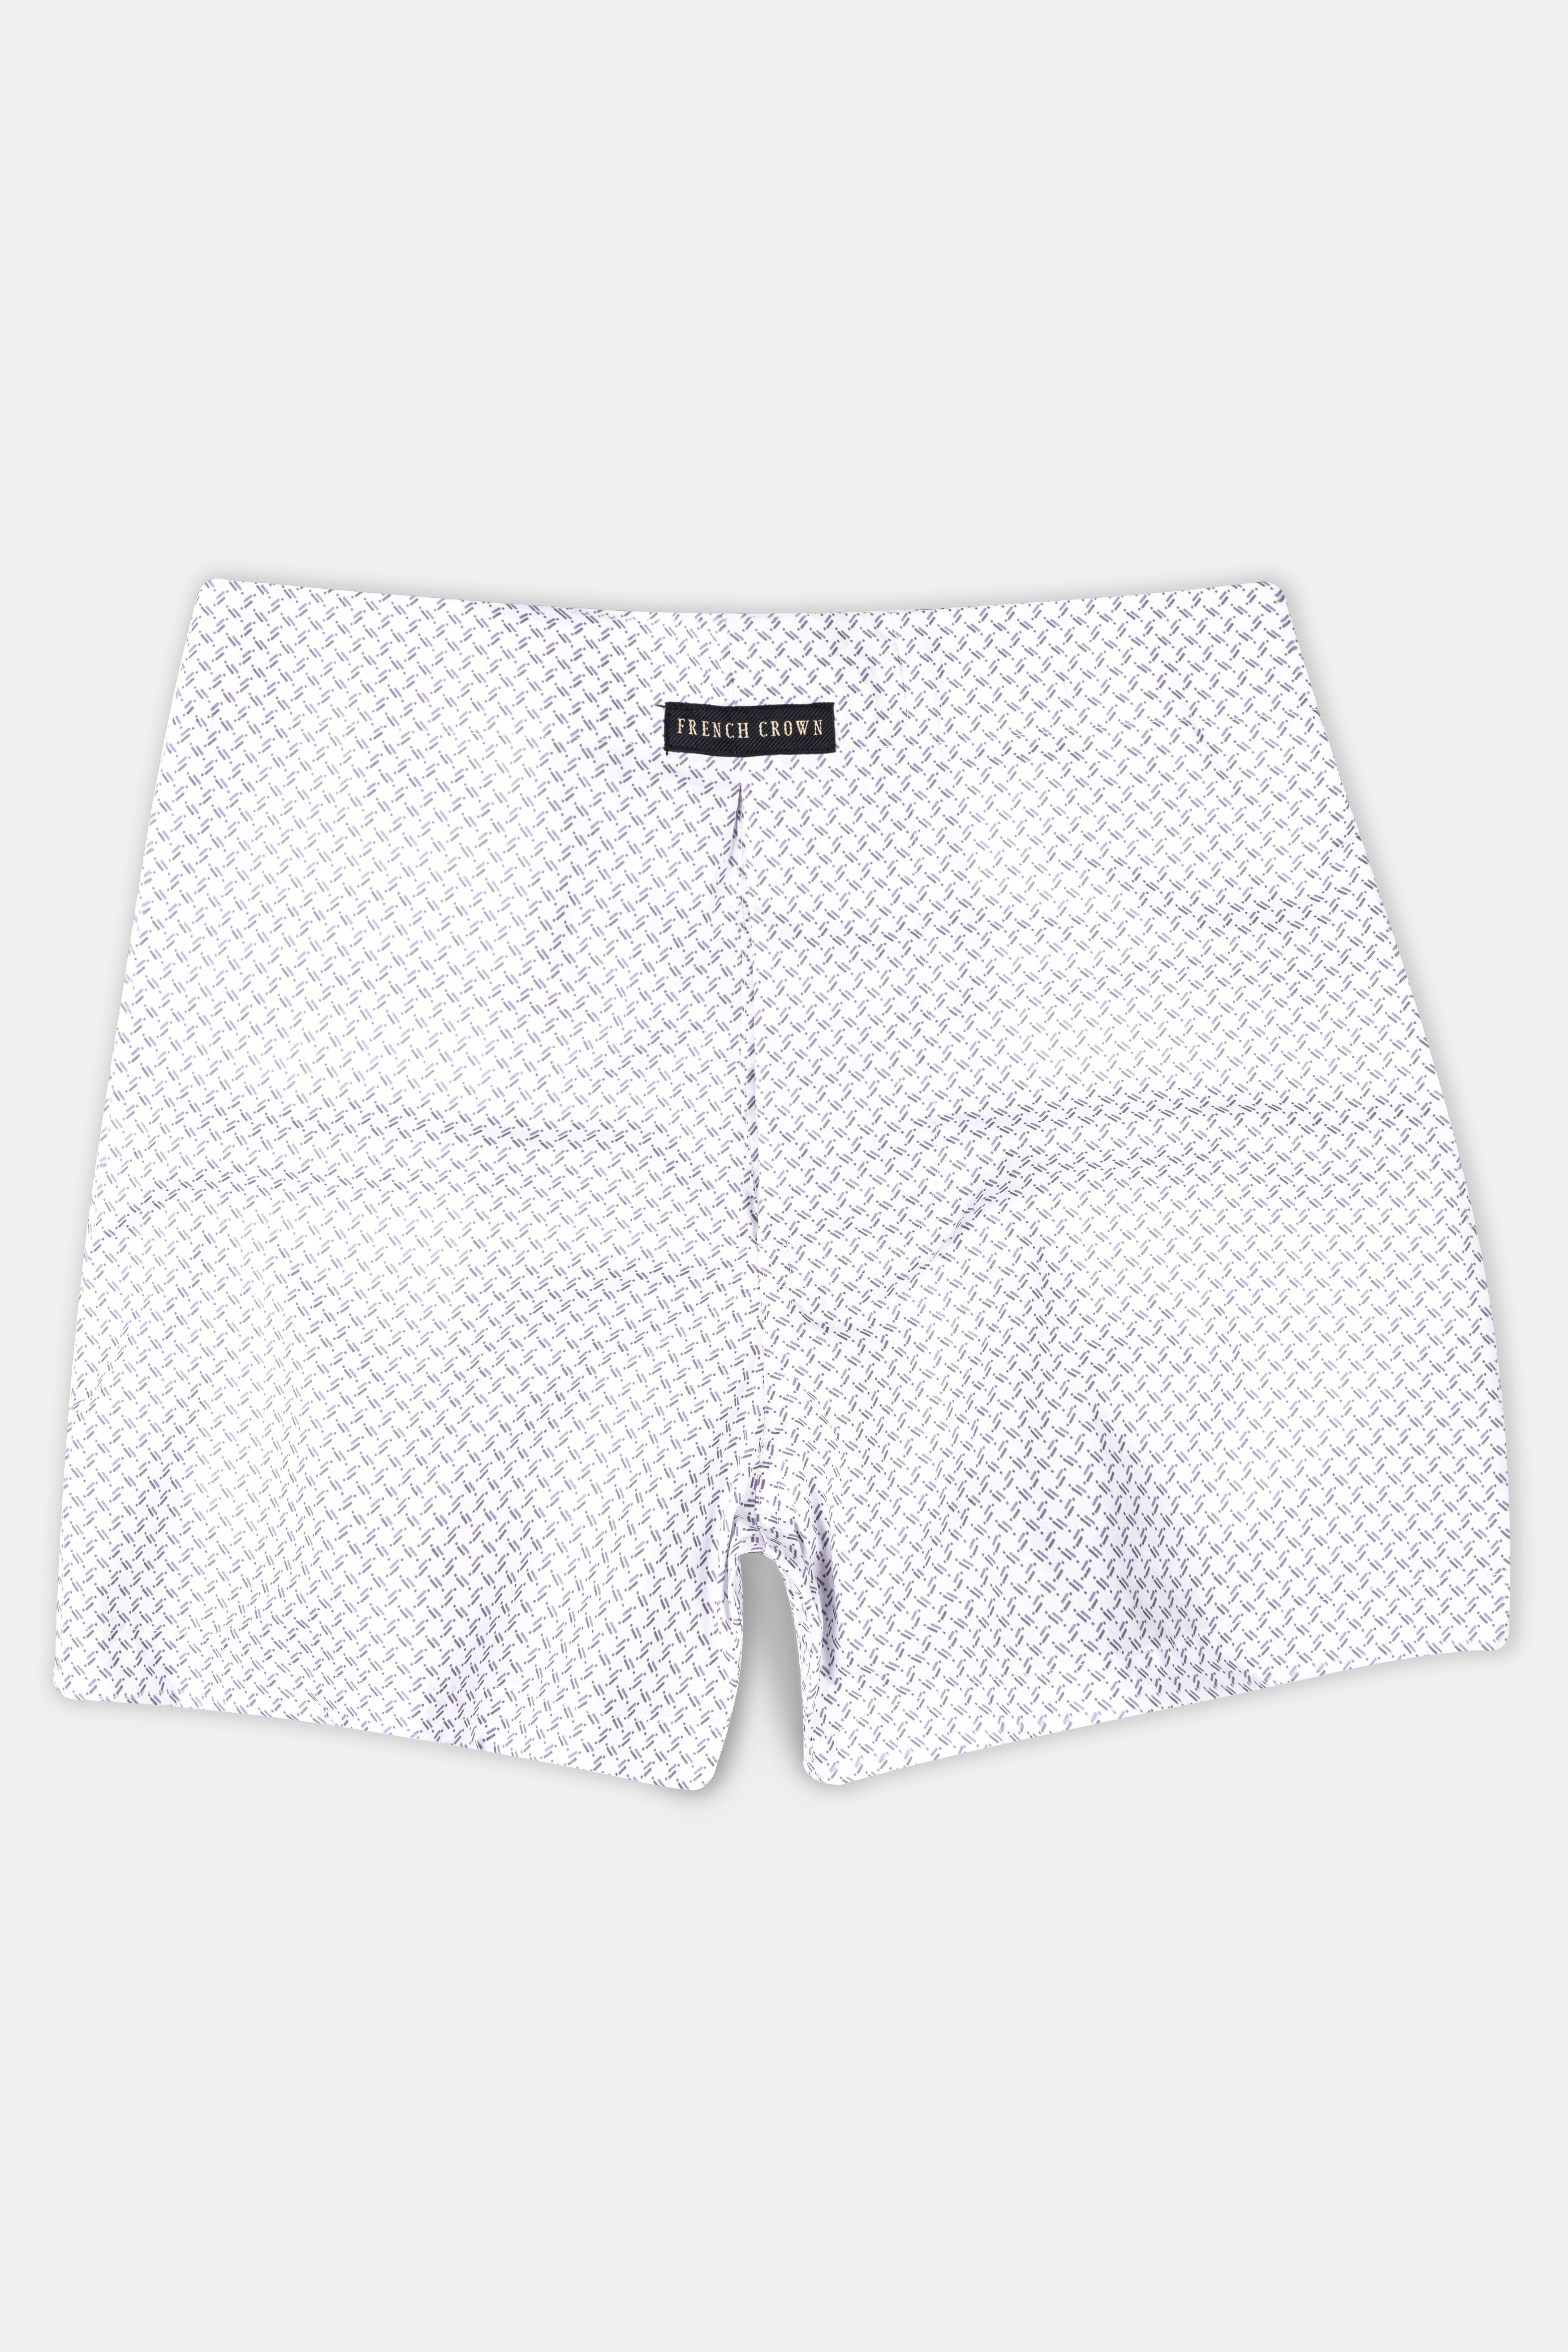 Astra Yellow Triangle Printed and Bright White With Comet Brown Printed Premium Cotton Boxers BX556-BX565-28, BX556-BX565-30, BX556-BX565-32, BX556-BX565-34, BX556-BX565-36, BX556-BX565-38, BX556-BX565-40, BX556-BX565-42, BX556-BX565-44